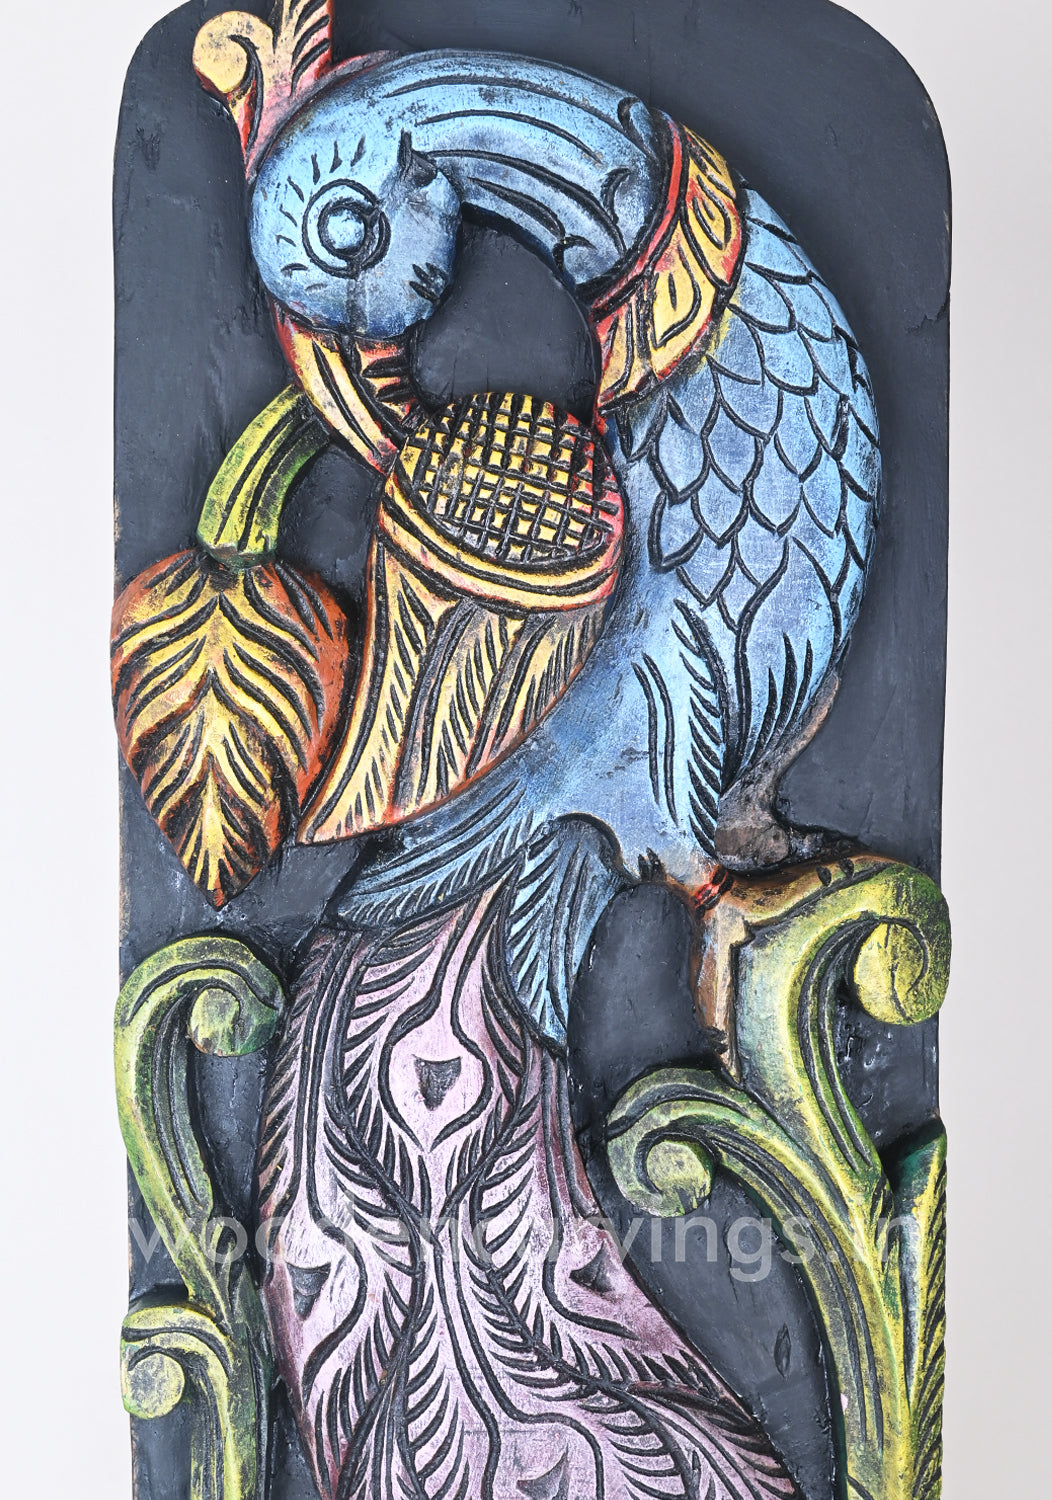 Beauty of Blue Standing Peacock Vertical Multicoloured Wall Panel 19"